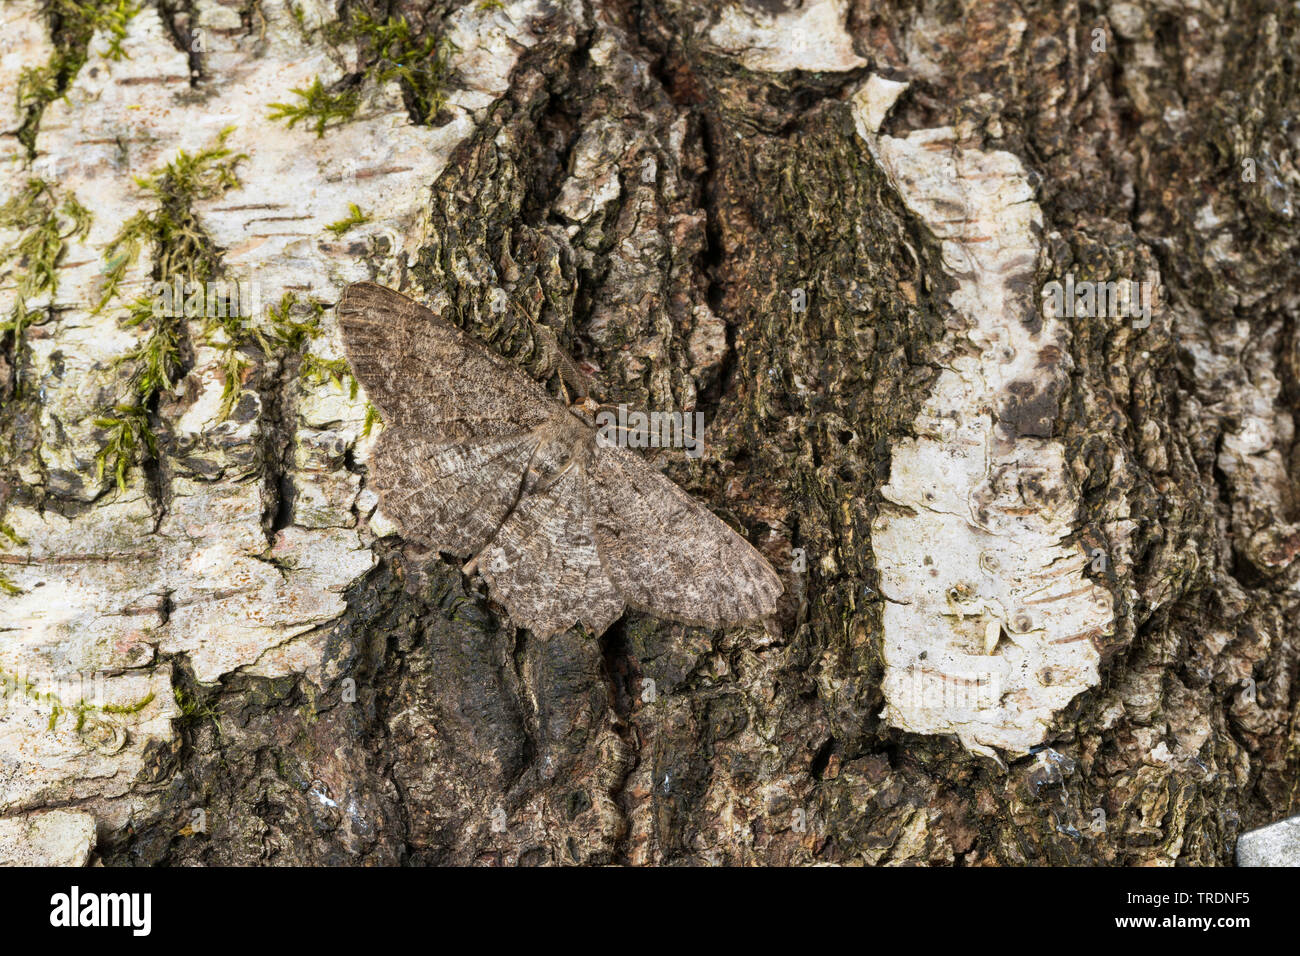 Hypomecis punctinalis (Hypomecis punctinalis, Serraca punctinalis, Boarmia punctinalis), sitting on bark well camouflaged, Germany Stock Photo